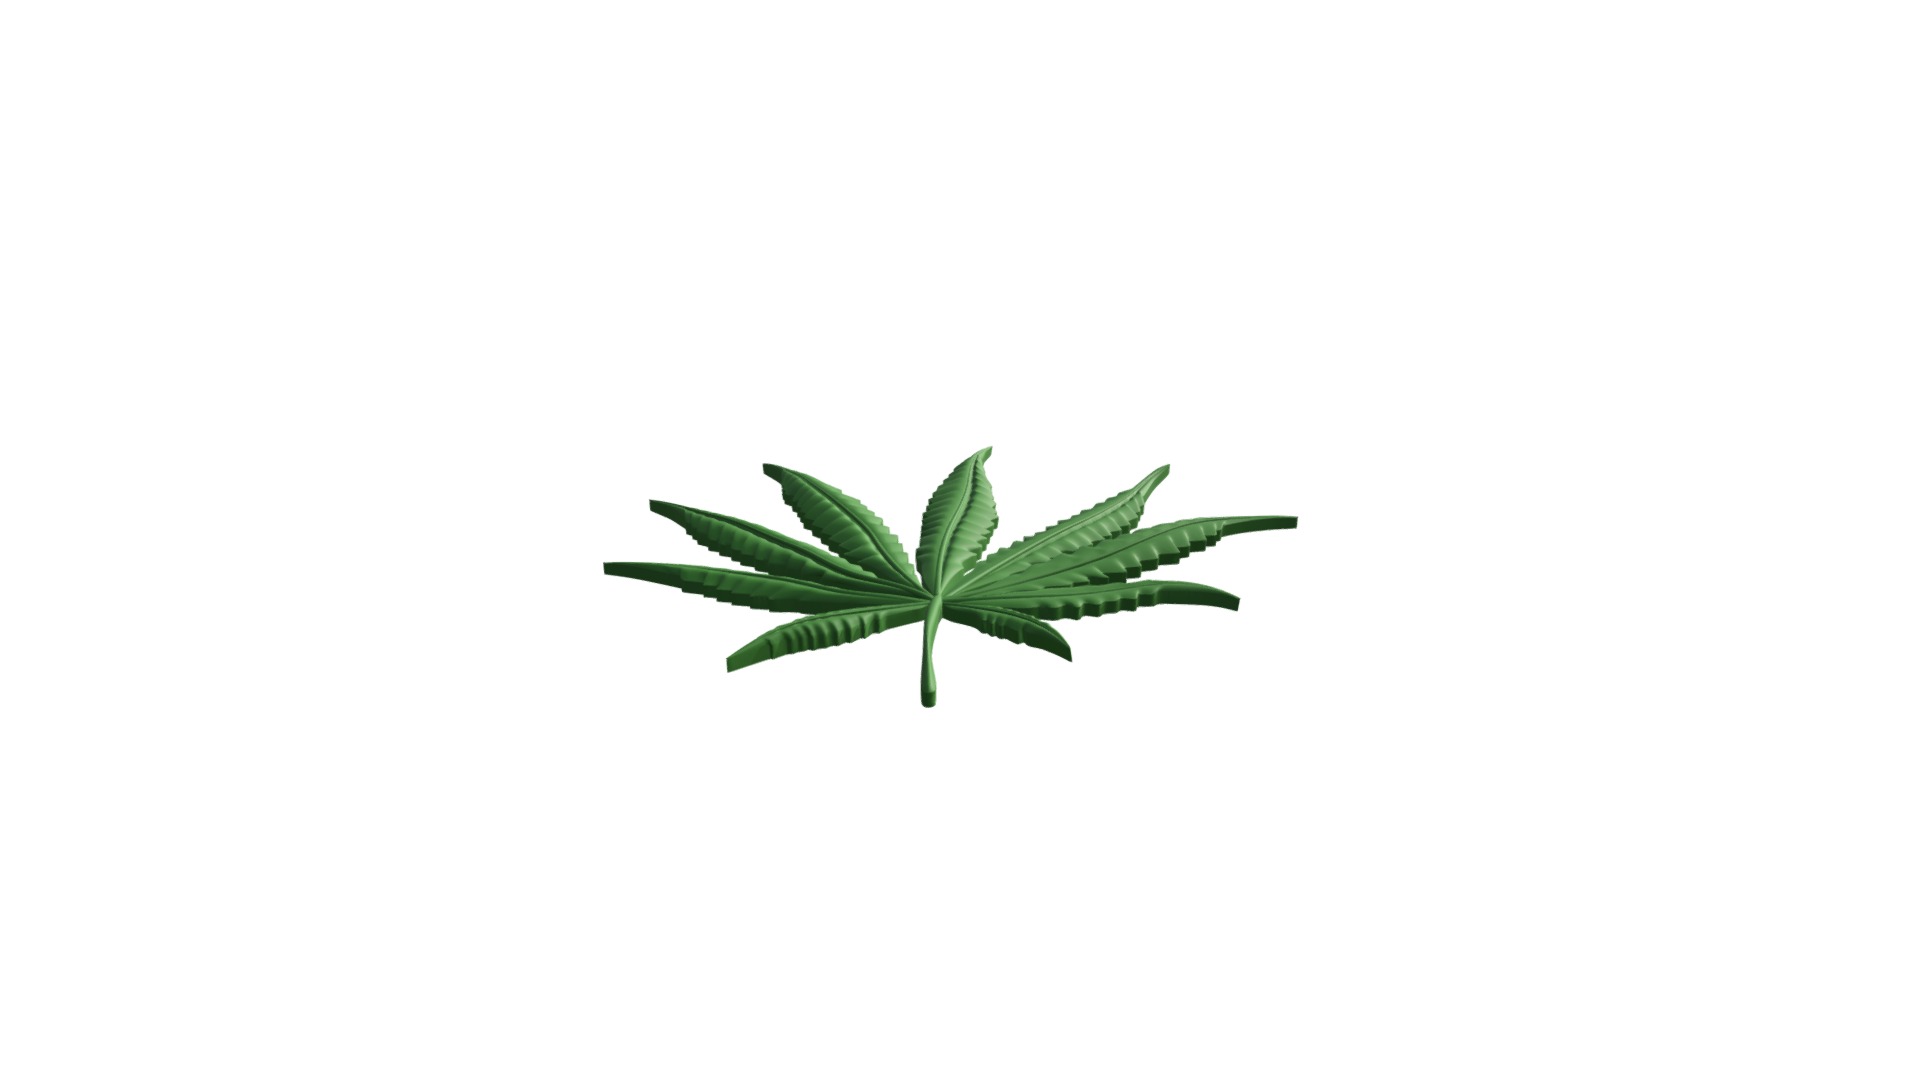 3D model Hemp Leaf - This is a 3D model of the Hemp Leaf. The 3D model is about a green leaf on a white background.